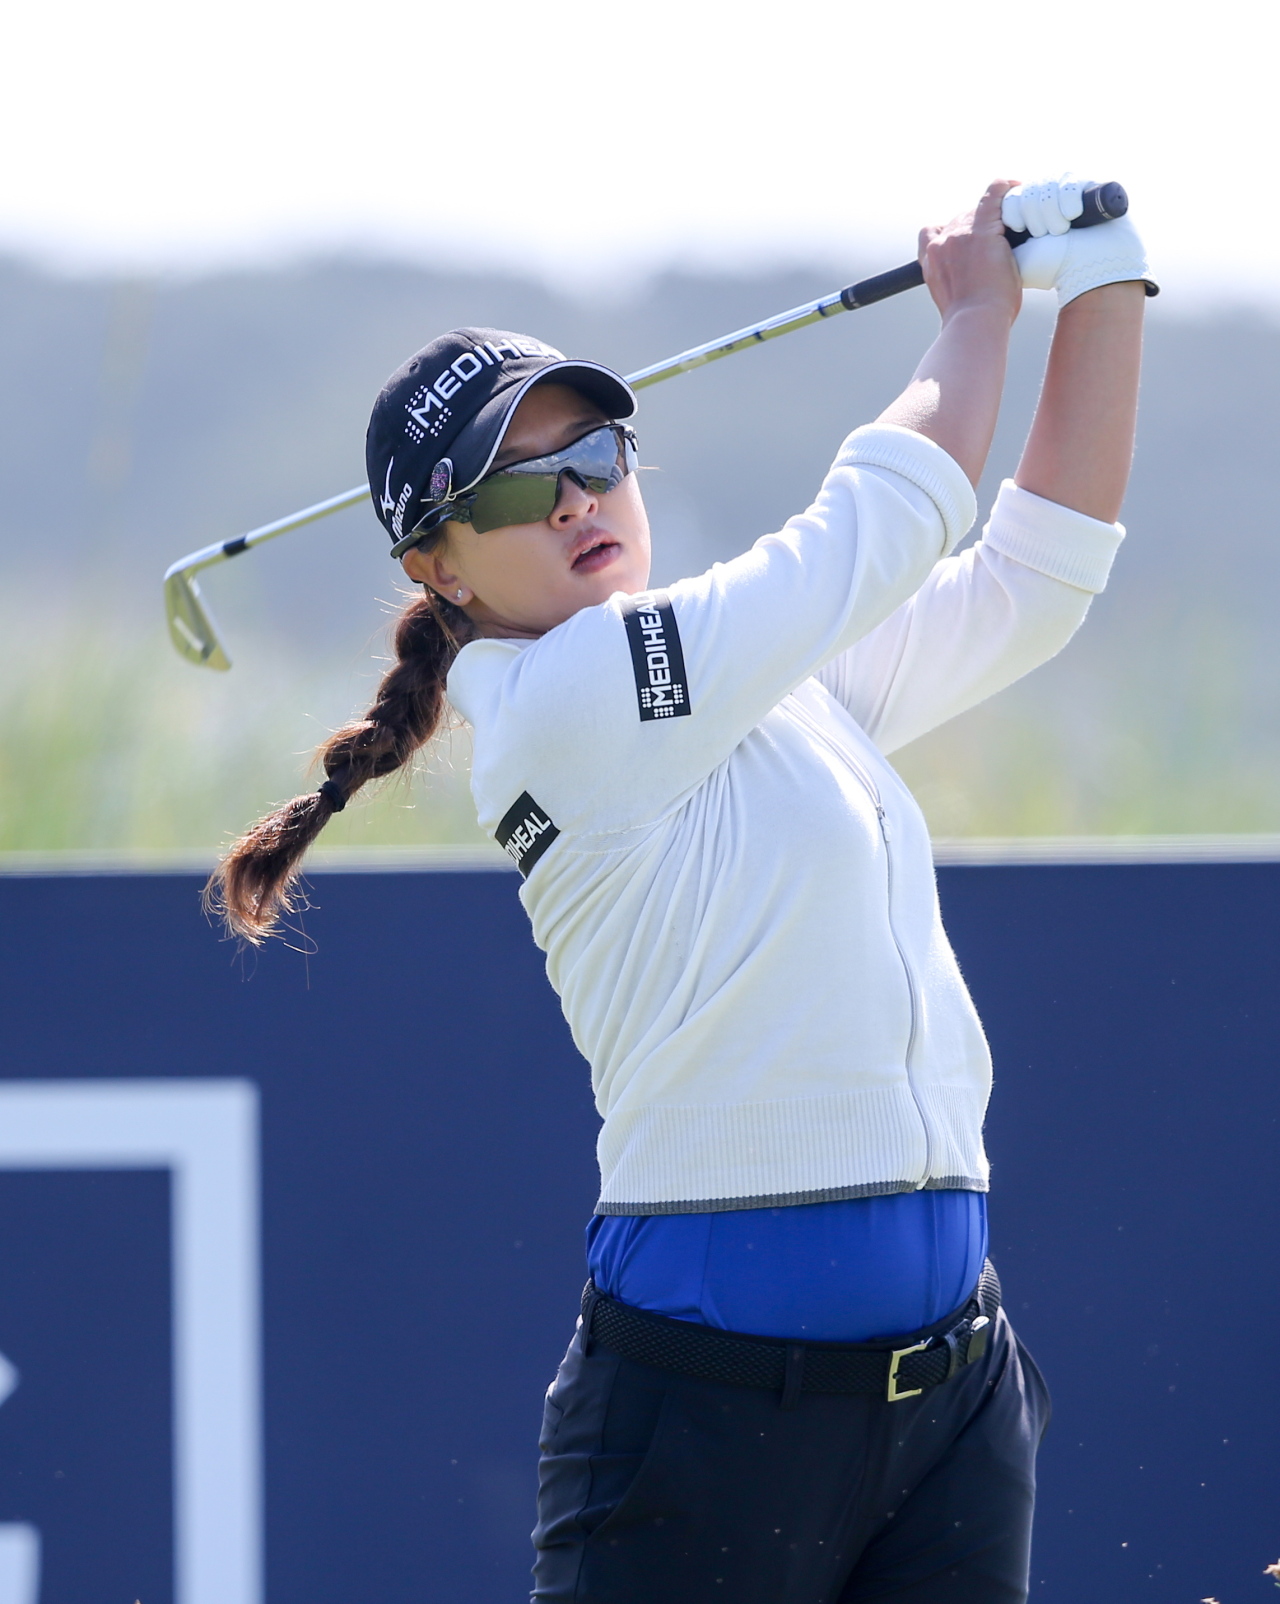 In this EPA photo, Kim Sei-young of South Korea hits a shot during the final round of the AIG Women's Open at Carnoustie Golf Links in Carnoustie, Scotland, on Sunday. (EPA-Yonhap)